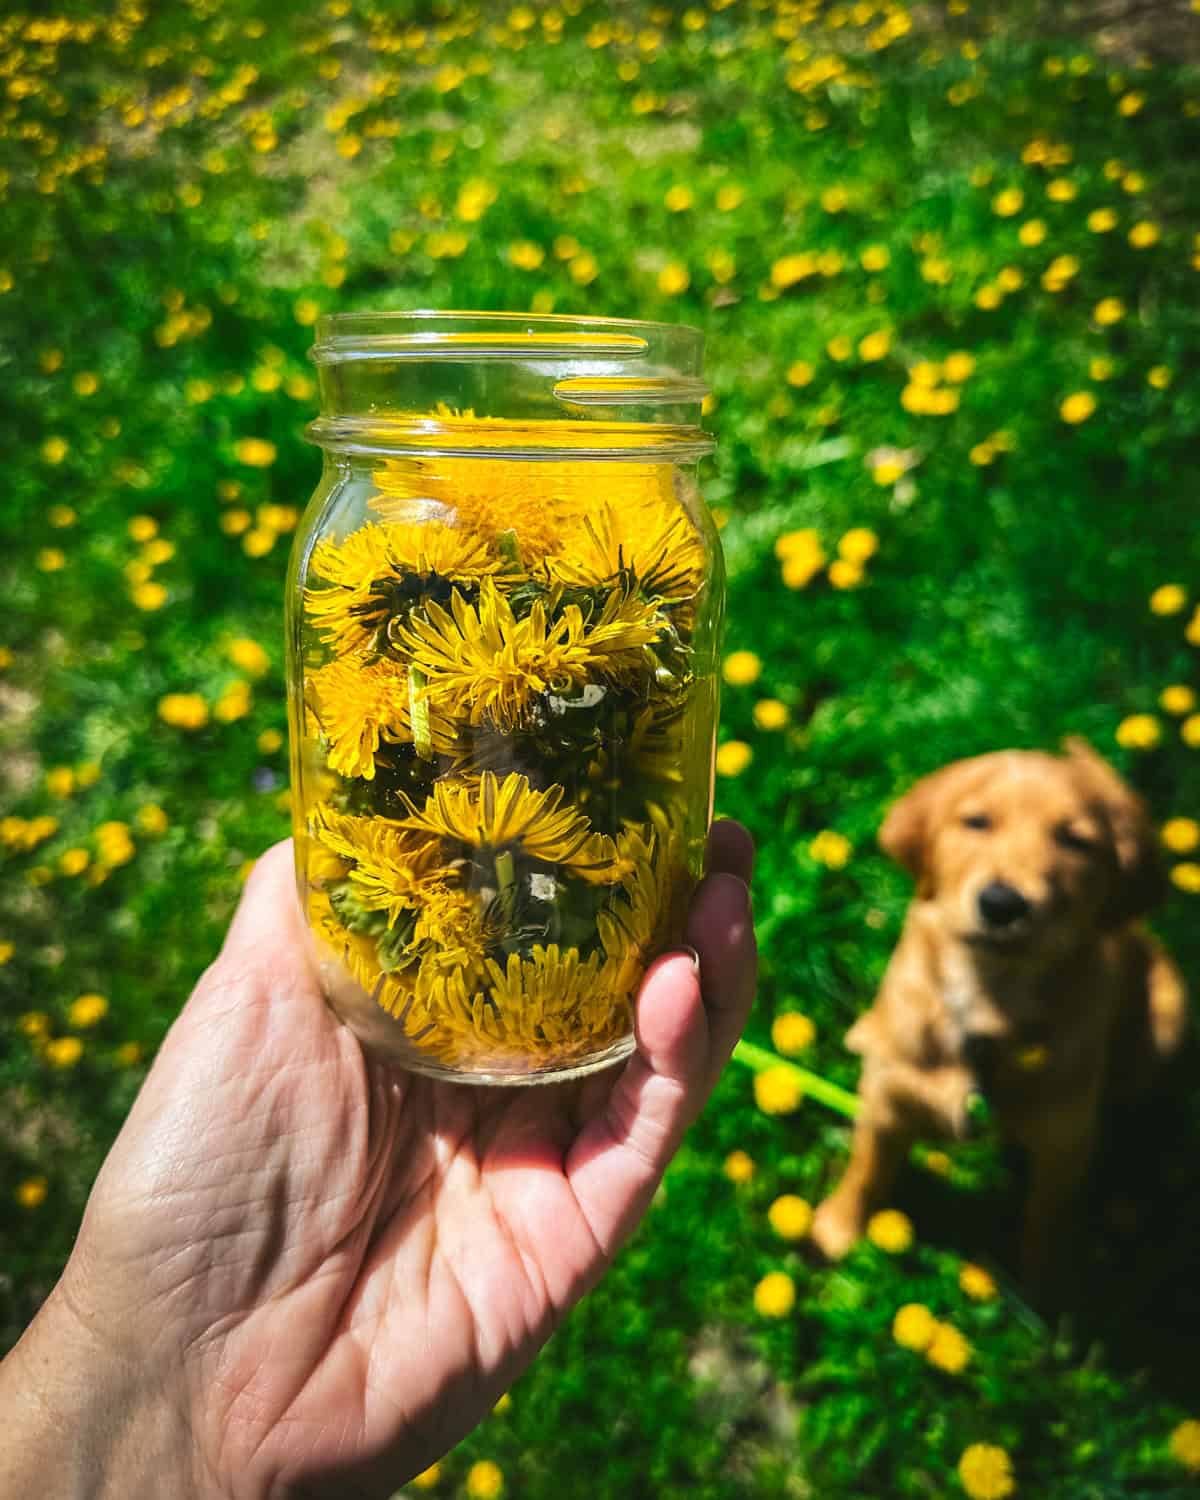 A jar of dandelions held up by a hand outside in a field of dandelions with a super cute Golden Retriever in the background. 